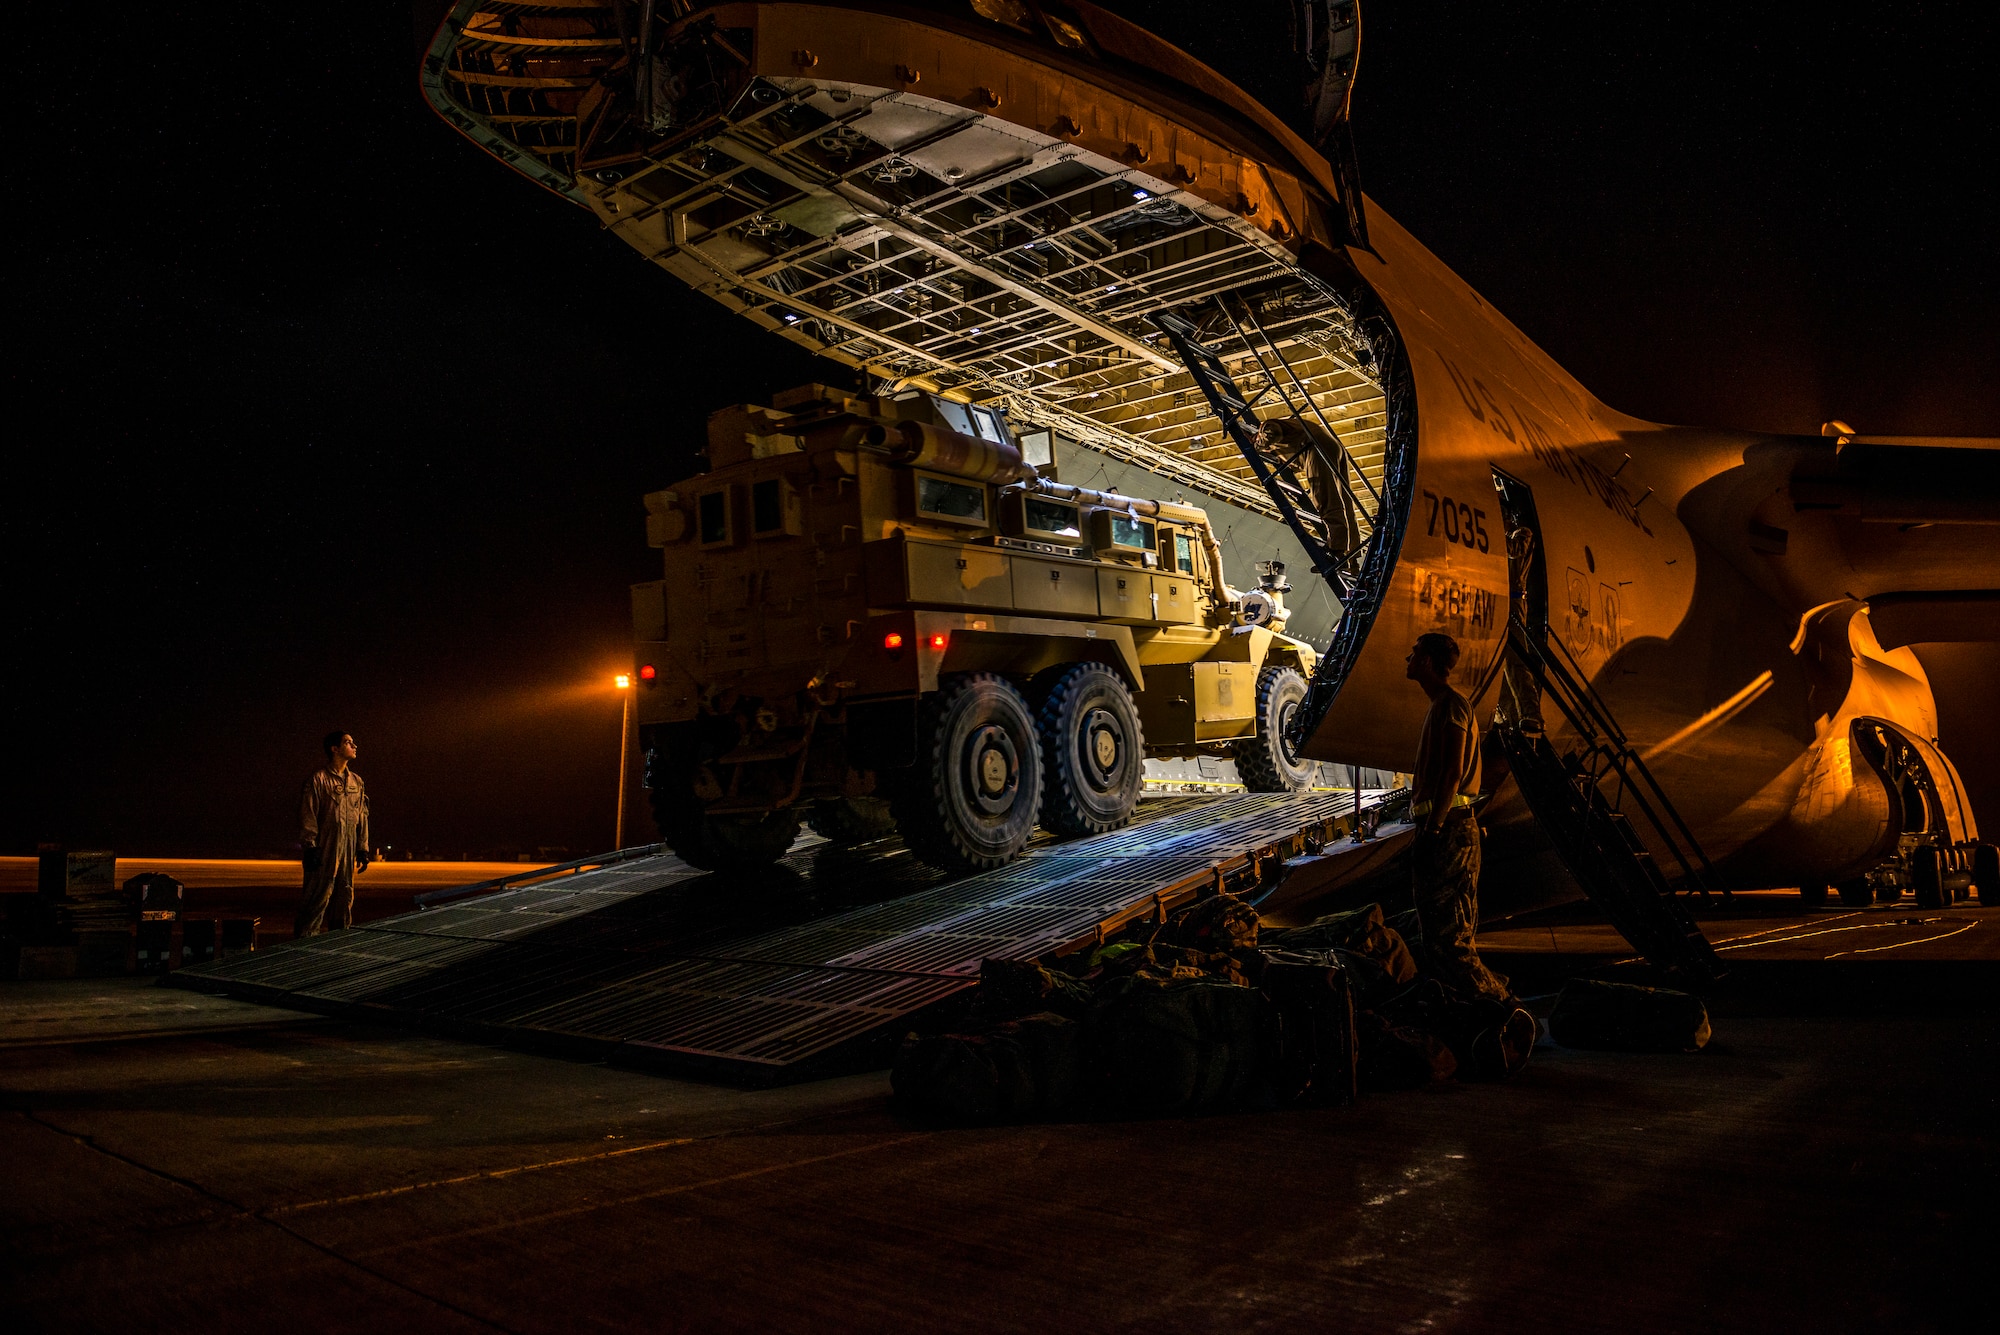 Airmen from the 9th Airlift Squadron and 455th Expeditionary Aerial Port Squadron with Marines from the Marine Expeditionary Brigade prepare to load vehicles into a C-5M Super Galaxy Oct. 6, 2014, at Camp Bastion, Afghanistan. Airmen and Marines loaded more than 266,000 pounds of cargo onto the C-5M as part of retrograde operations in Afghanistan. Aircrews for the retrograde operations, managed by the 385th Air Expeditionary Group Detachment 1, surpassed 11 million pounds of cargo transported in a 50-day period. During this time frame, crews under the 385th AEG broke Air Mobility Command’s operational cargo load record five times. The heaviest load to date is 280,880 pounds. (U.S. Air Force photo by Staff Sgt. Jeremy Bowcock)